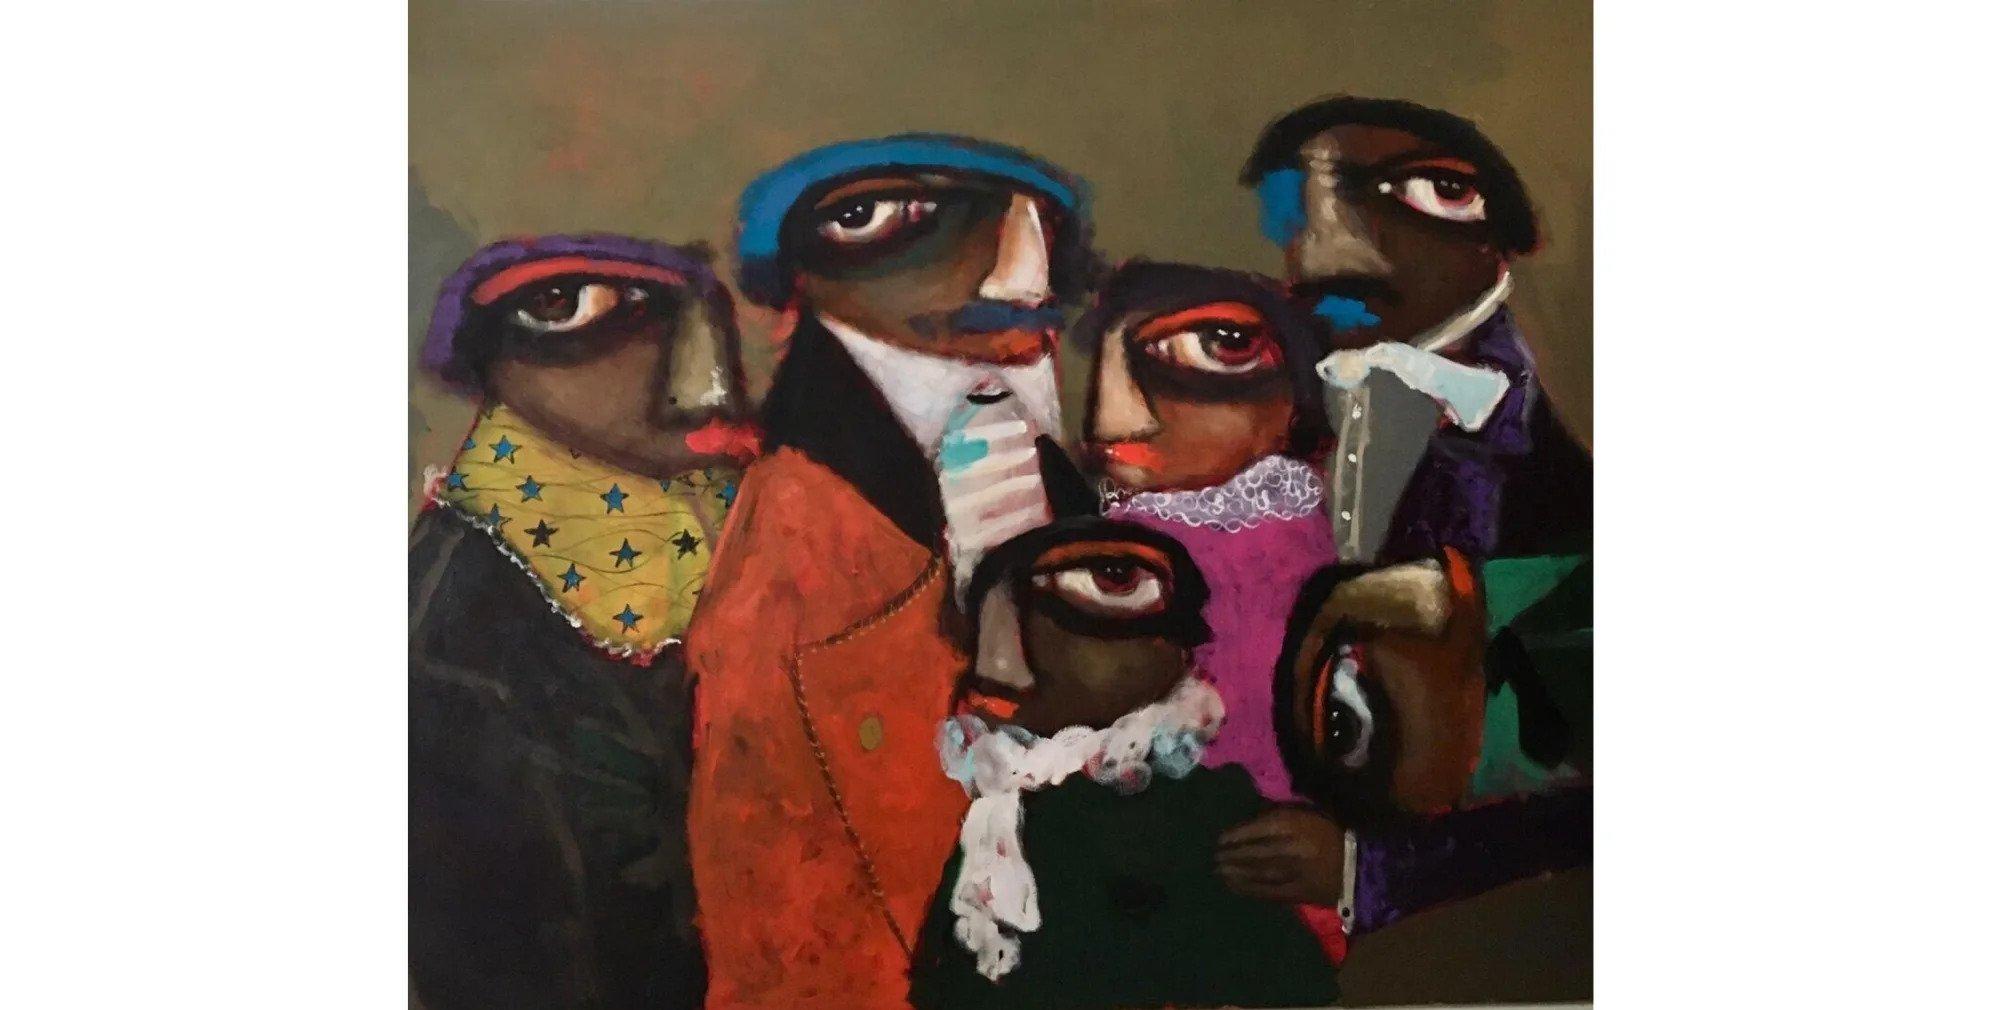 Untitled 1 

By Kingsley Obasi

Kingsley Obasi was born in 1983 in Nigeria. Obasi is a native of Abia State, and trained at the School of Art and Design, Yaba College of Technology, Nigeria. 

He is a painter whose work captures the human activities